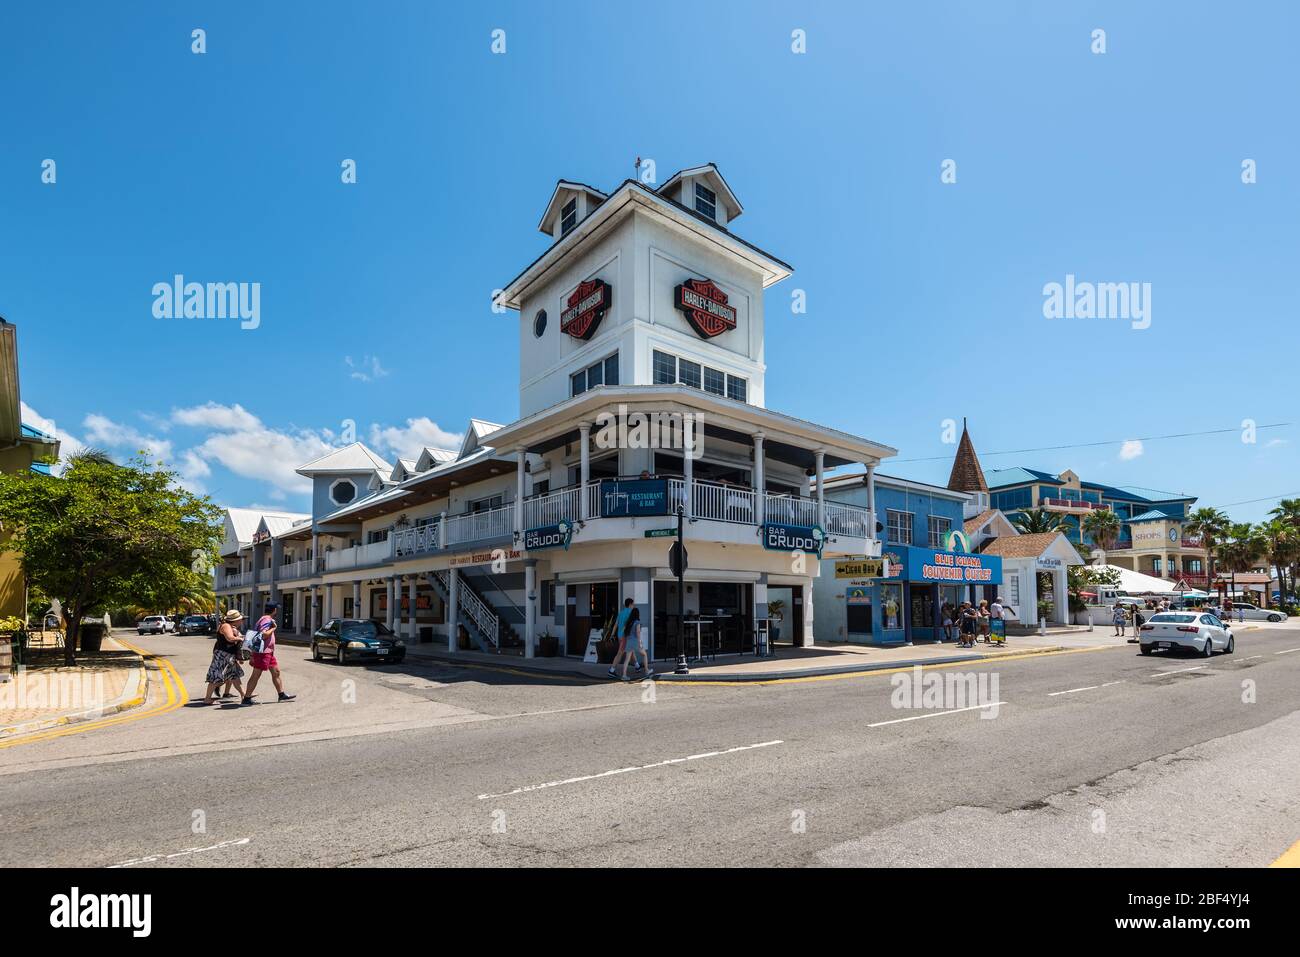 George Town, Grand Cayman Island, UK - April 23, 2019: Street view of George Town at day with pedestrians near cafes and tourist shops in downtown of Stock Photo